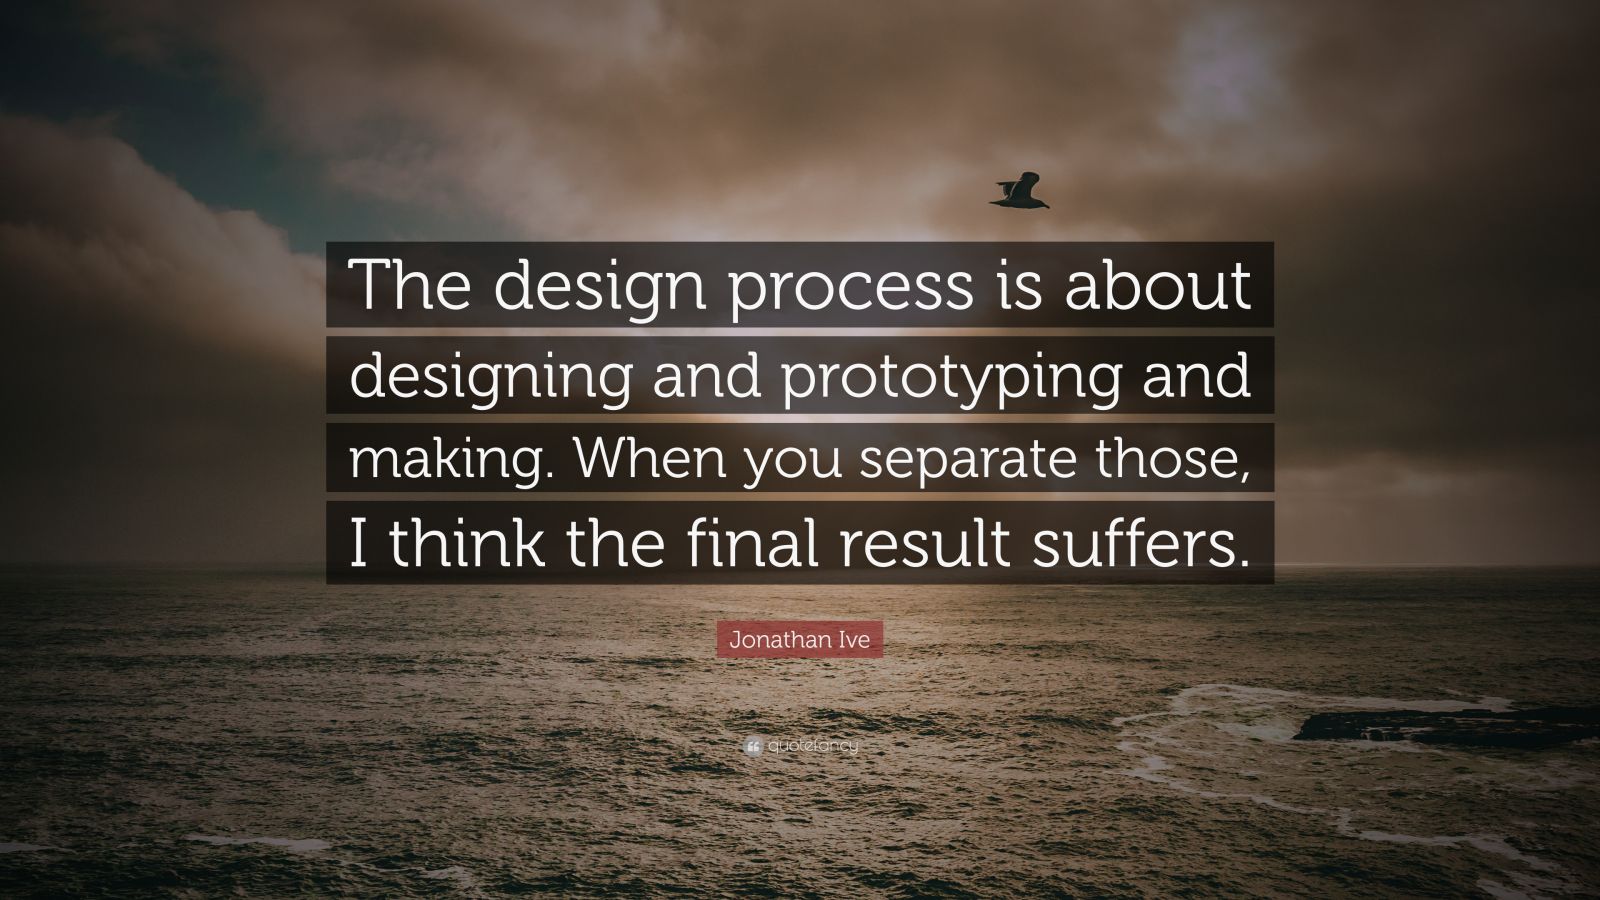 Jonathan Ive Quote: “The design process is about designing and